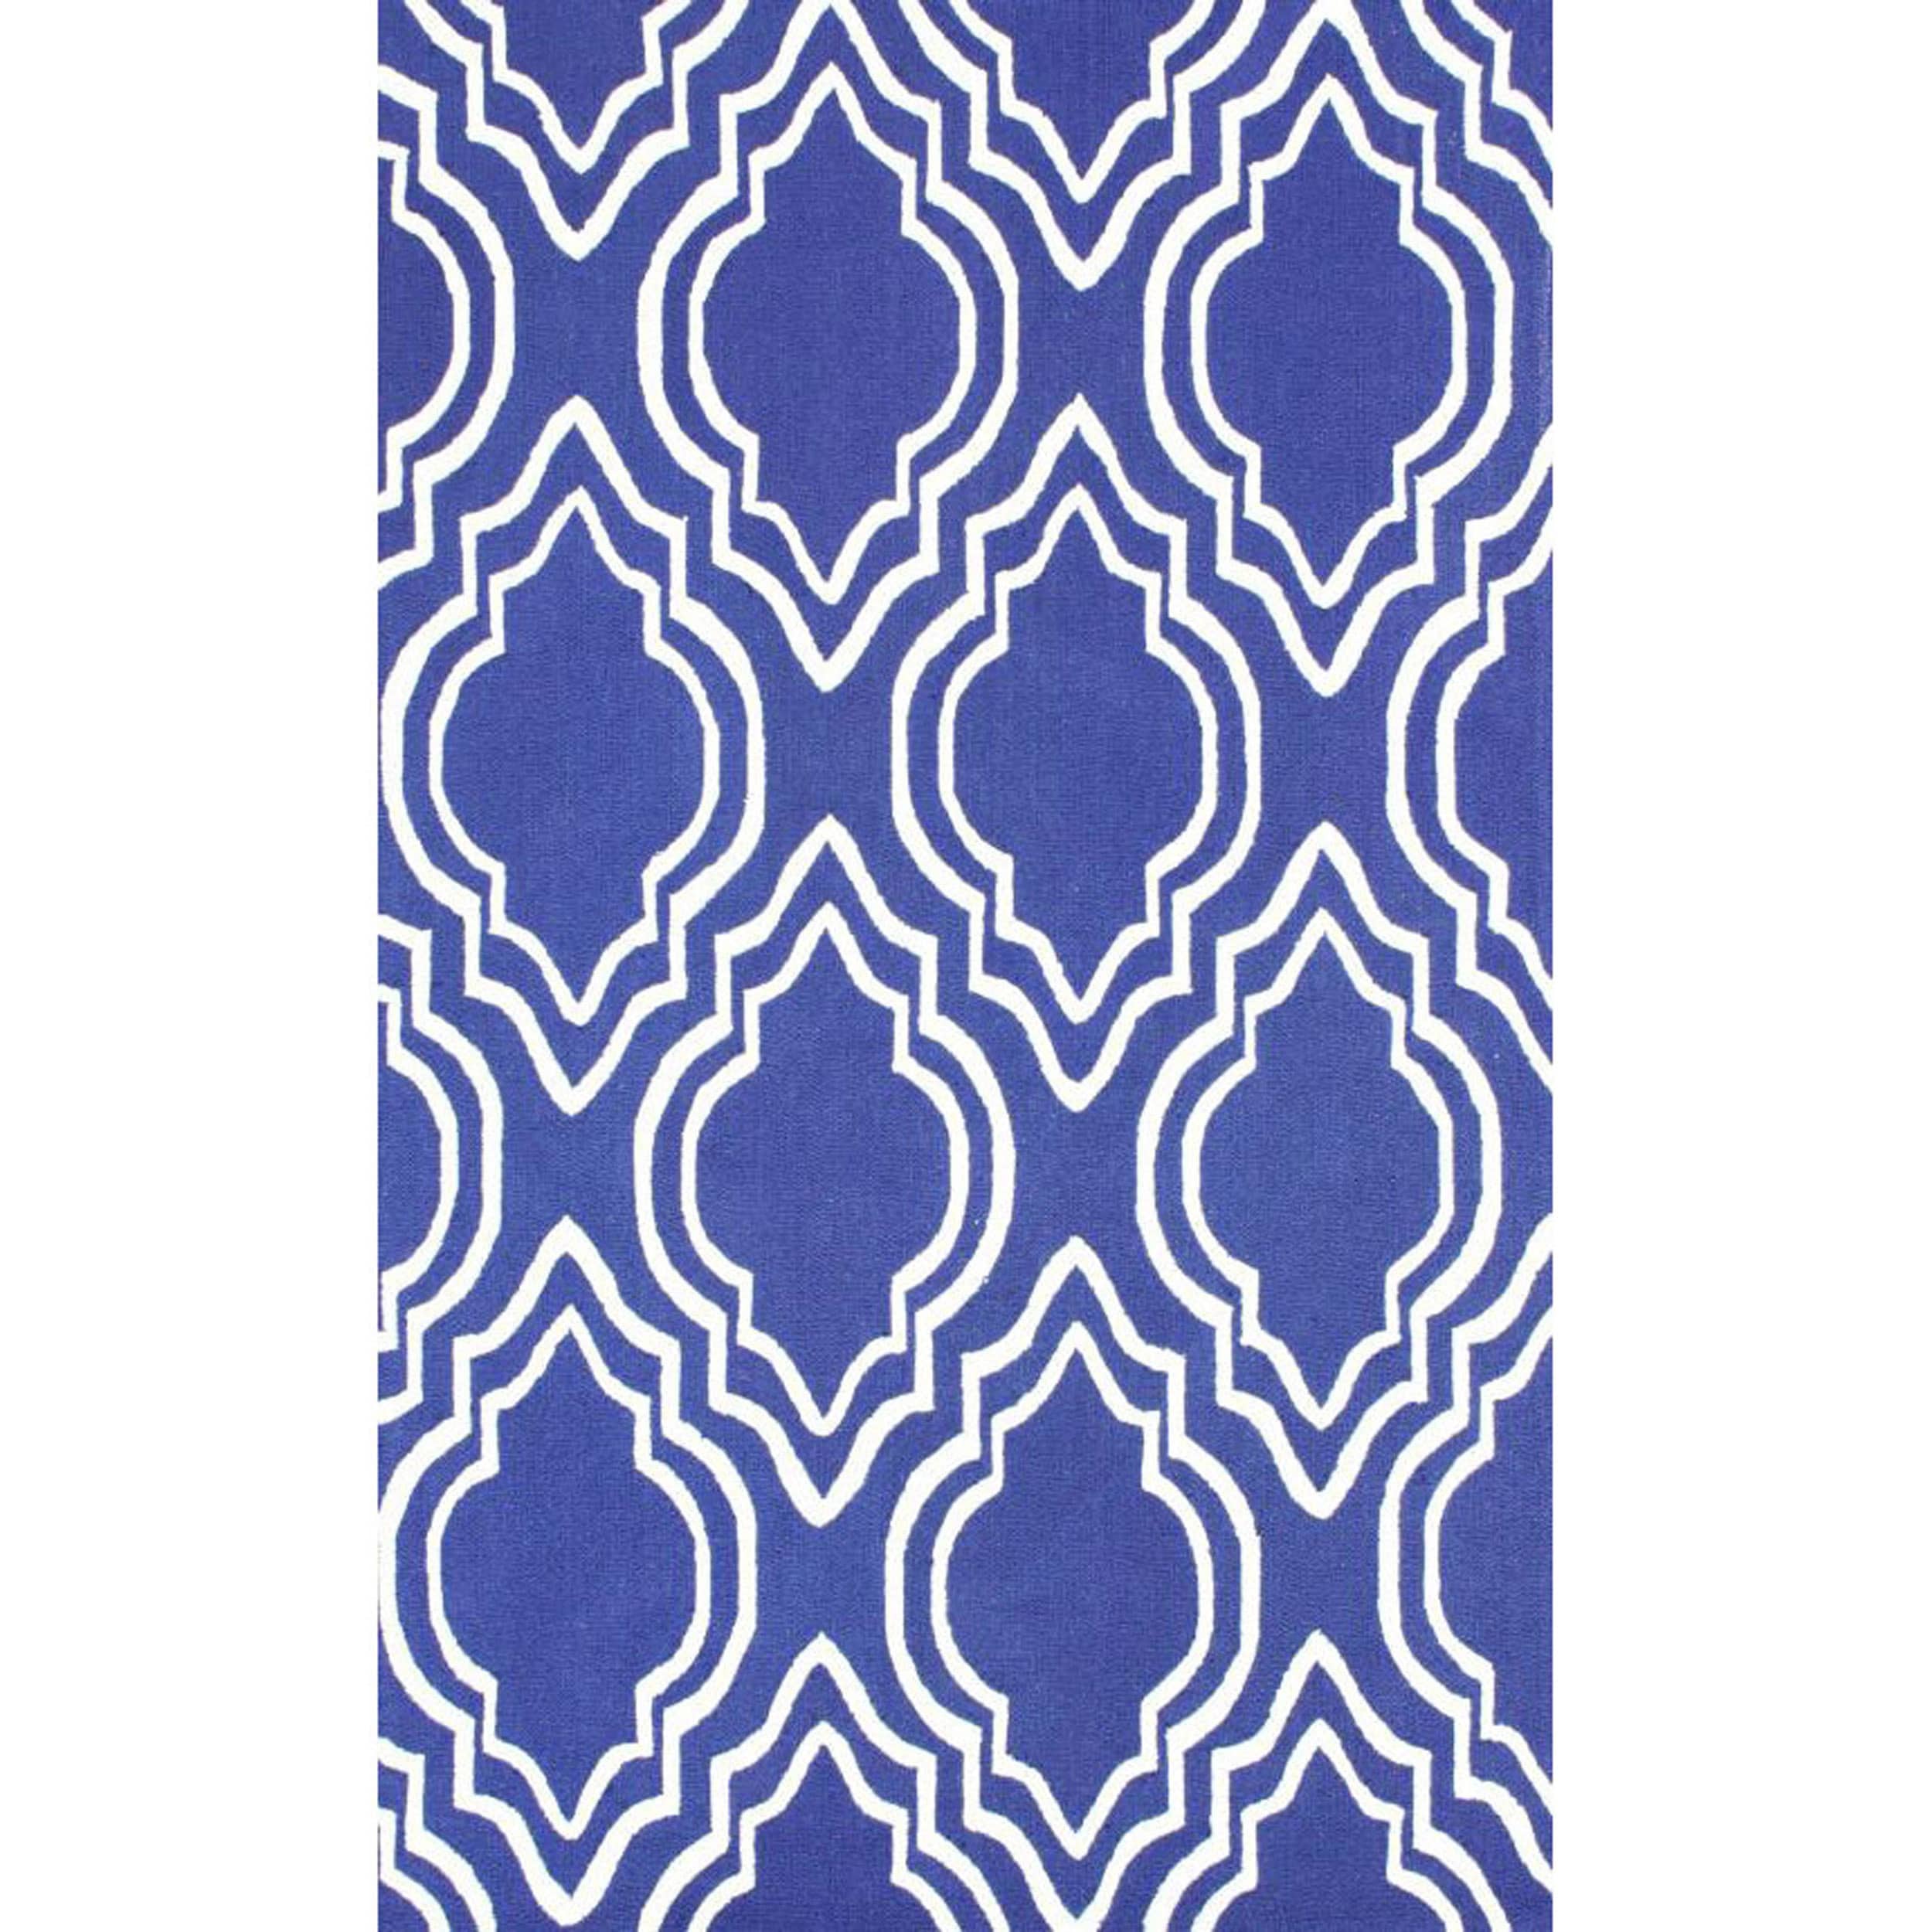 Nuloom Handmade Modern Trellis Blue Wool Rug (5 X 8) (IvoryPattern AbstractTip We recommend the use of a non skid pad to keep the rug in place on smooth surfaces.All rug sizes are approximate. Due to the difference of monitor colors, some rug colors may